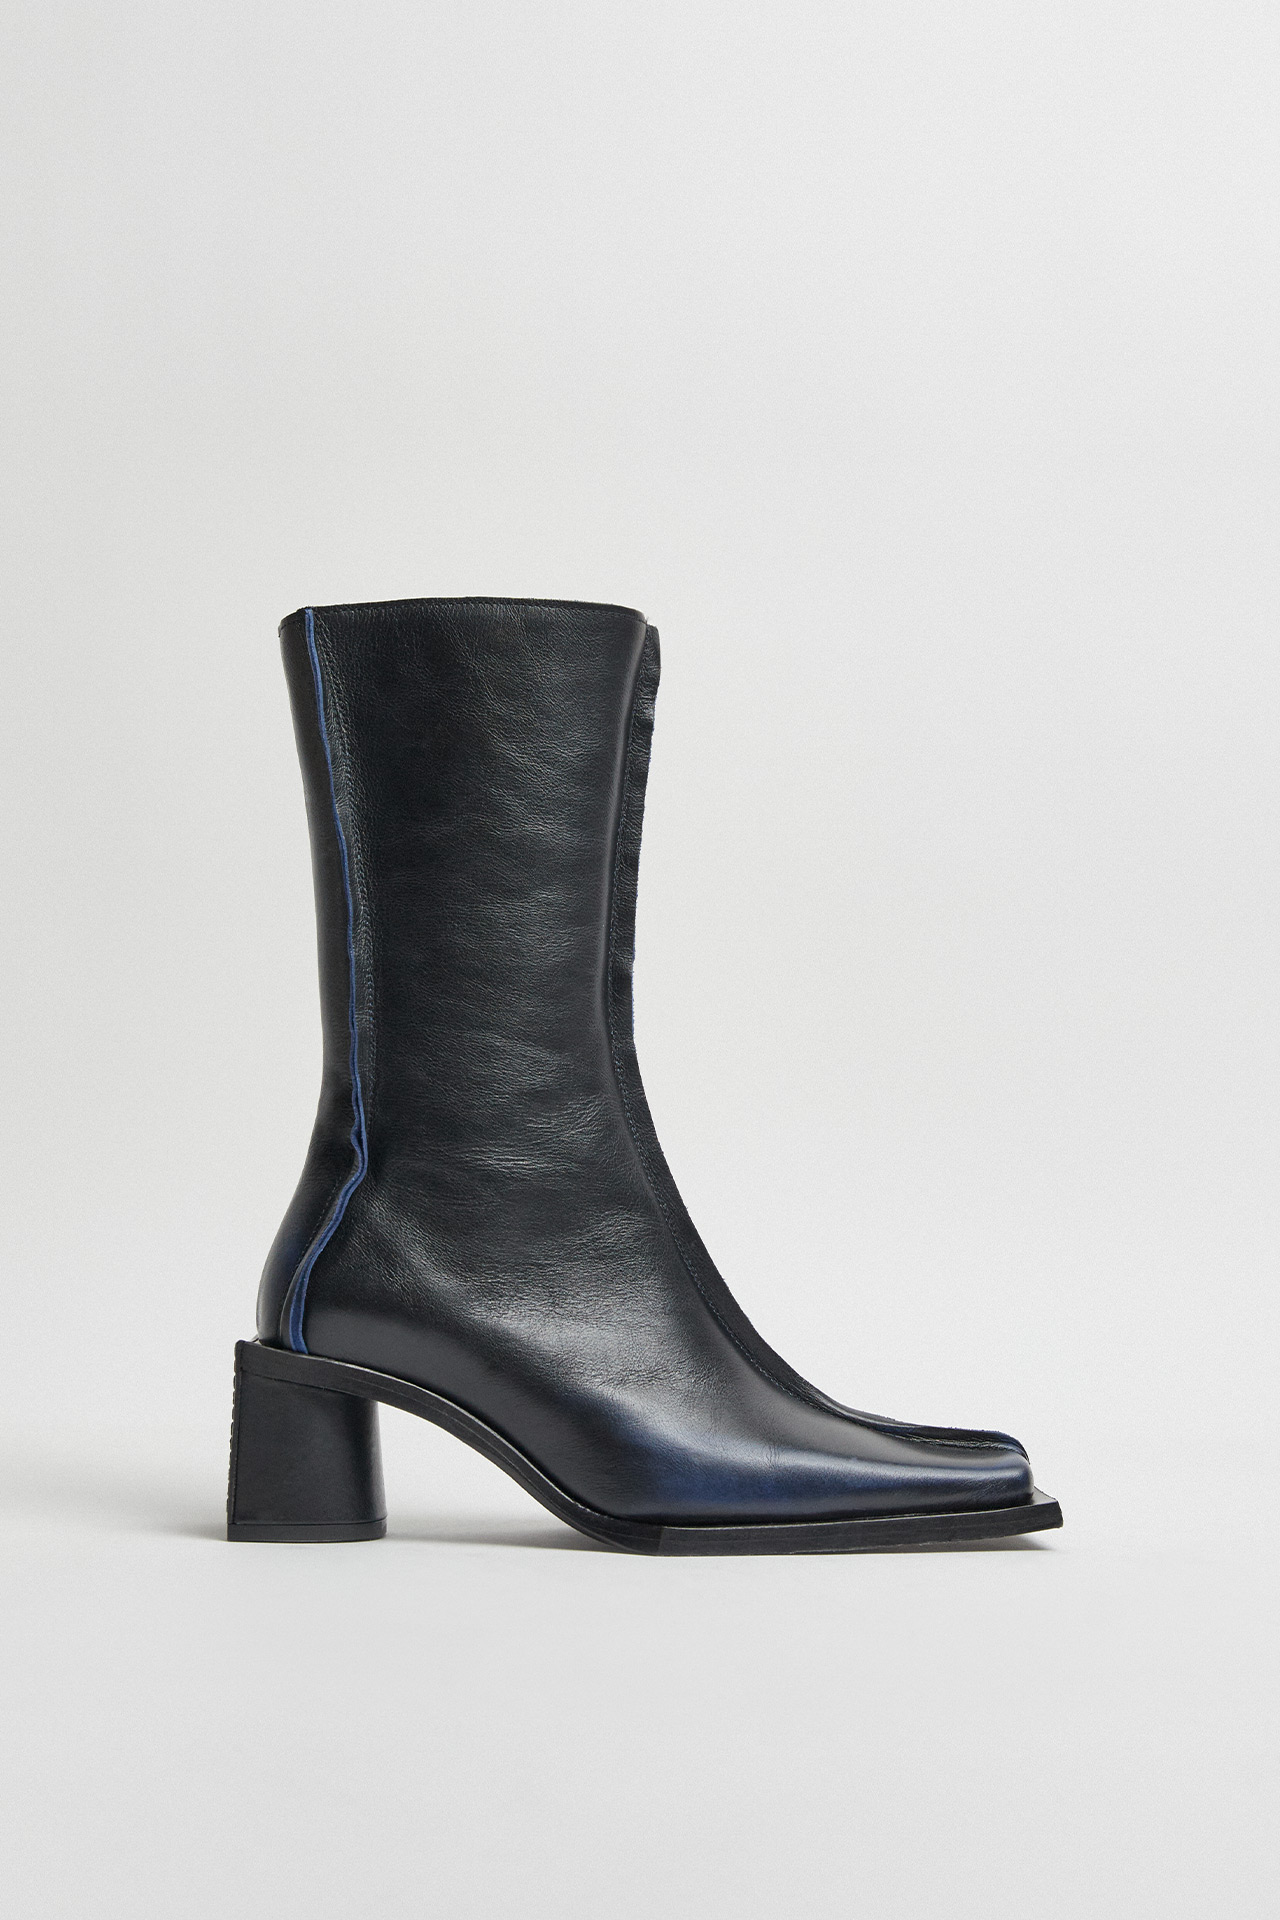 Reiko Midnight Blue Boots | Miista Europe | Made in Portugal